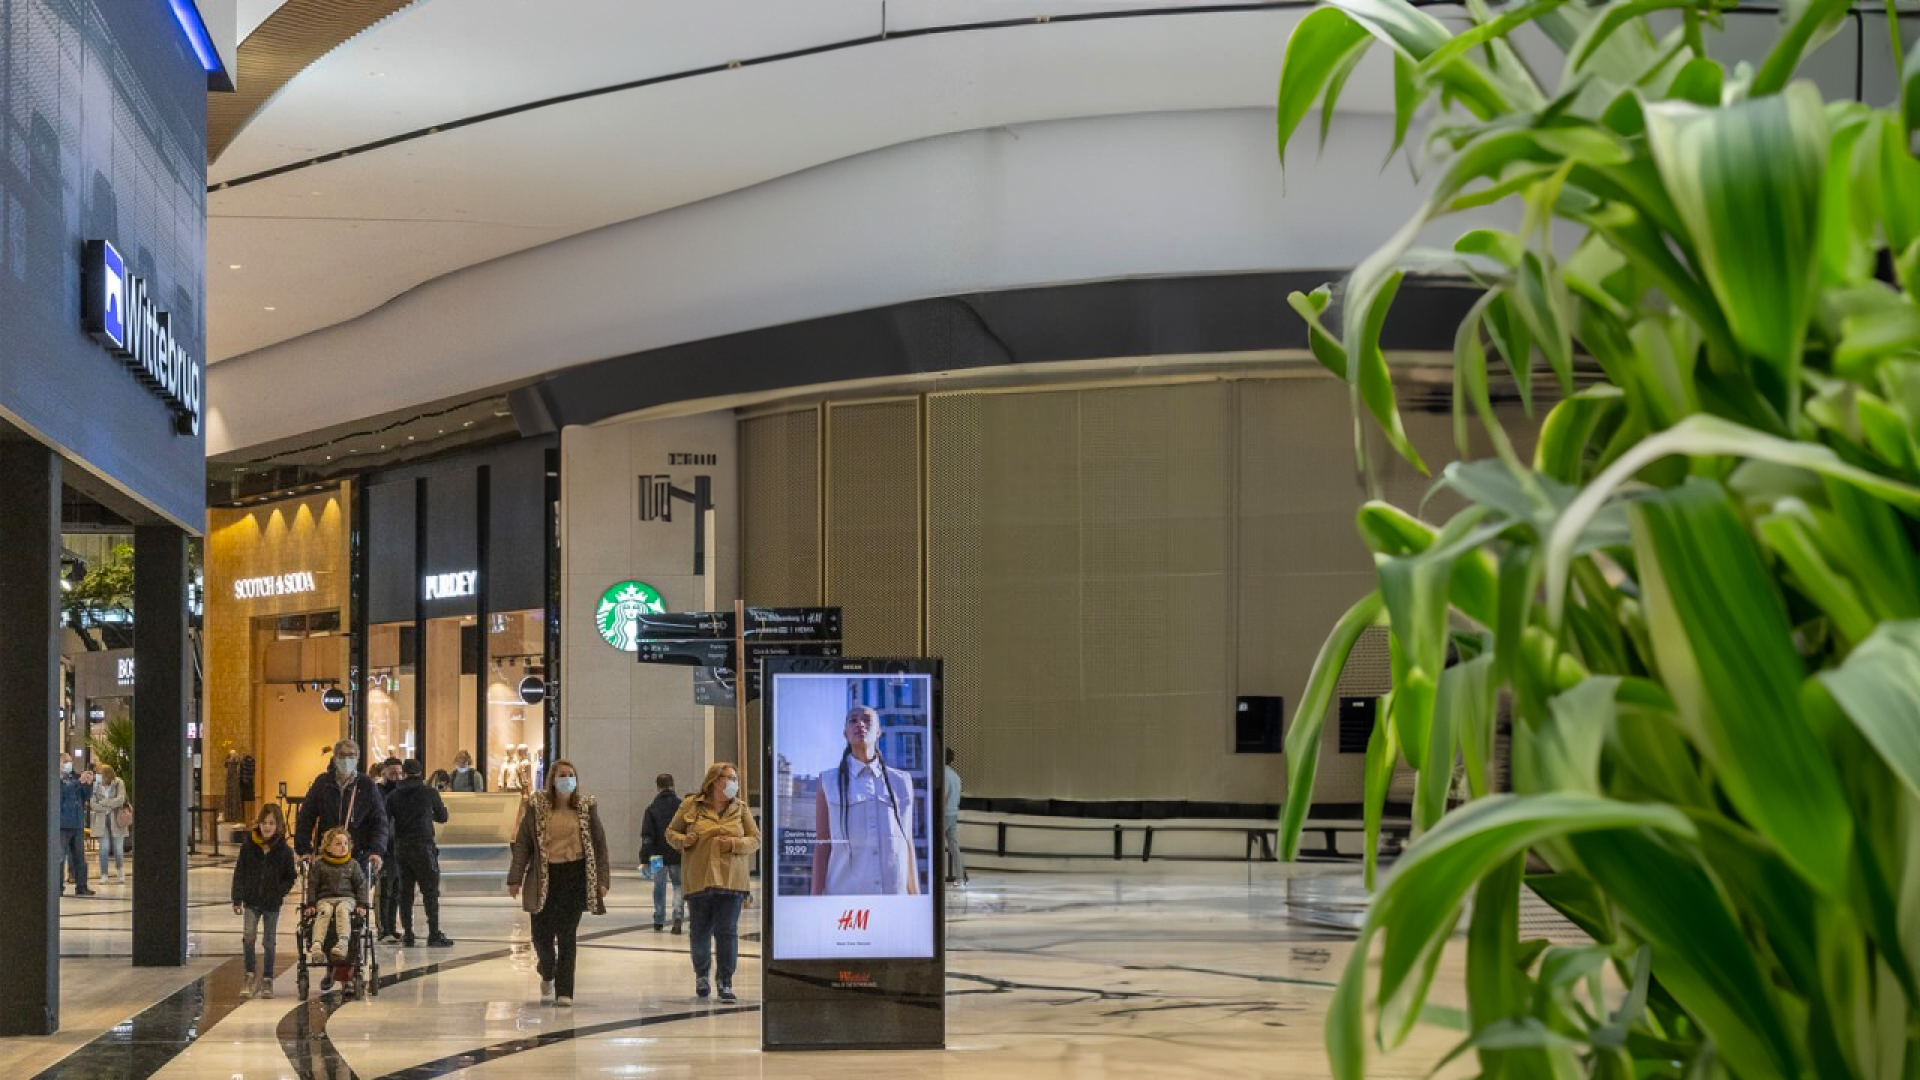 A shopping mall with people walking and a digital ad display in the center.